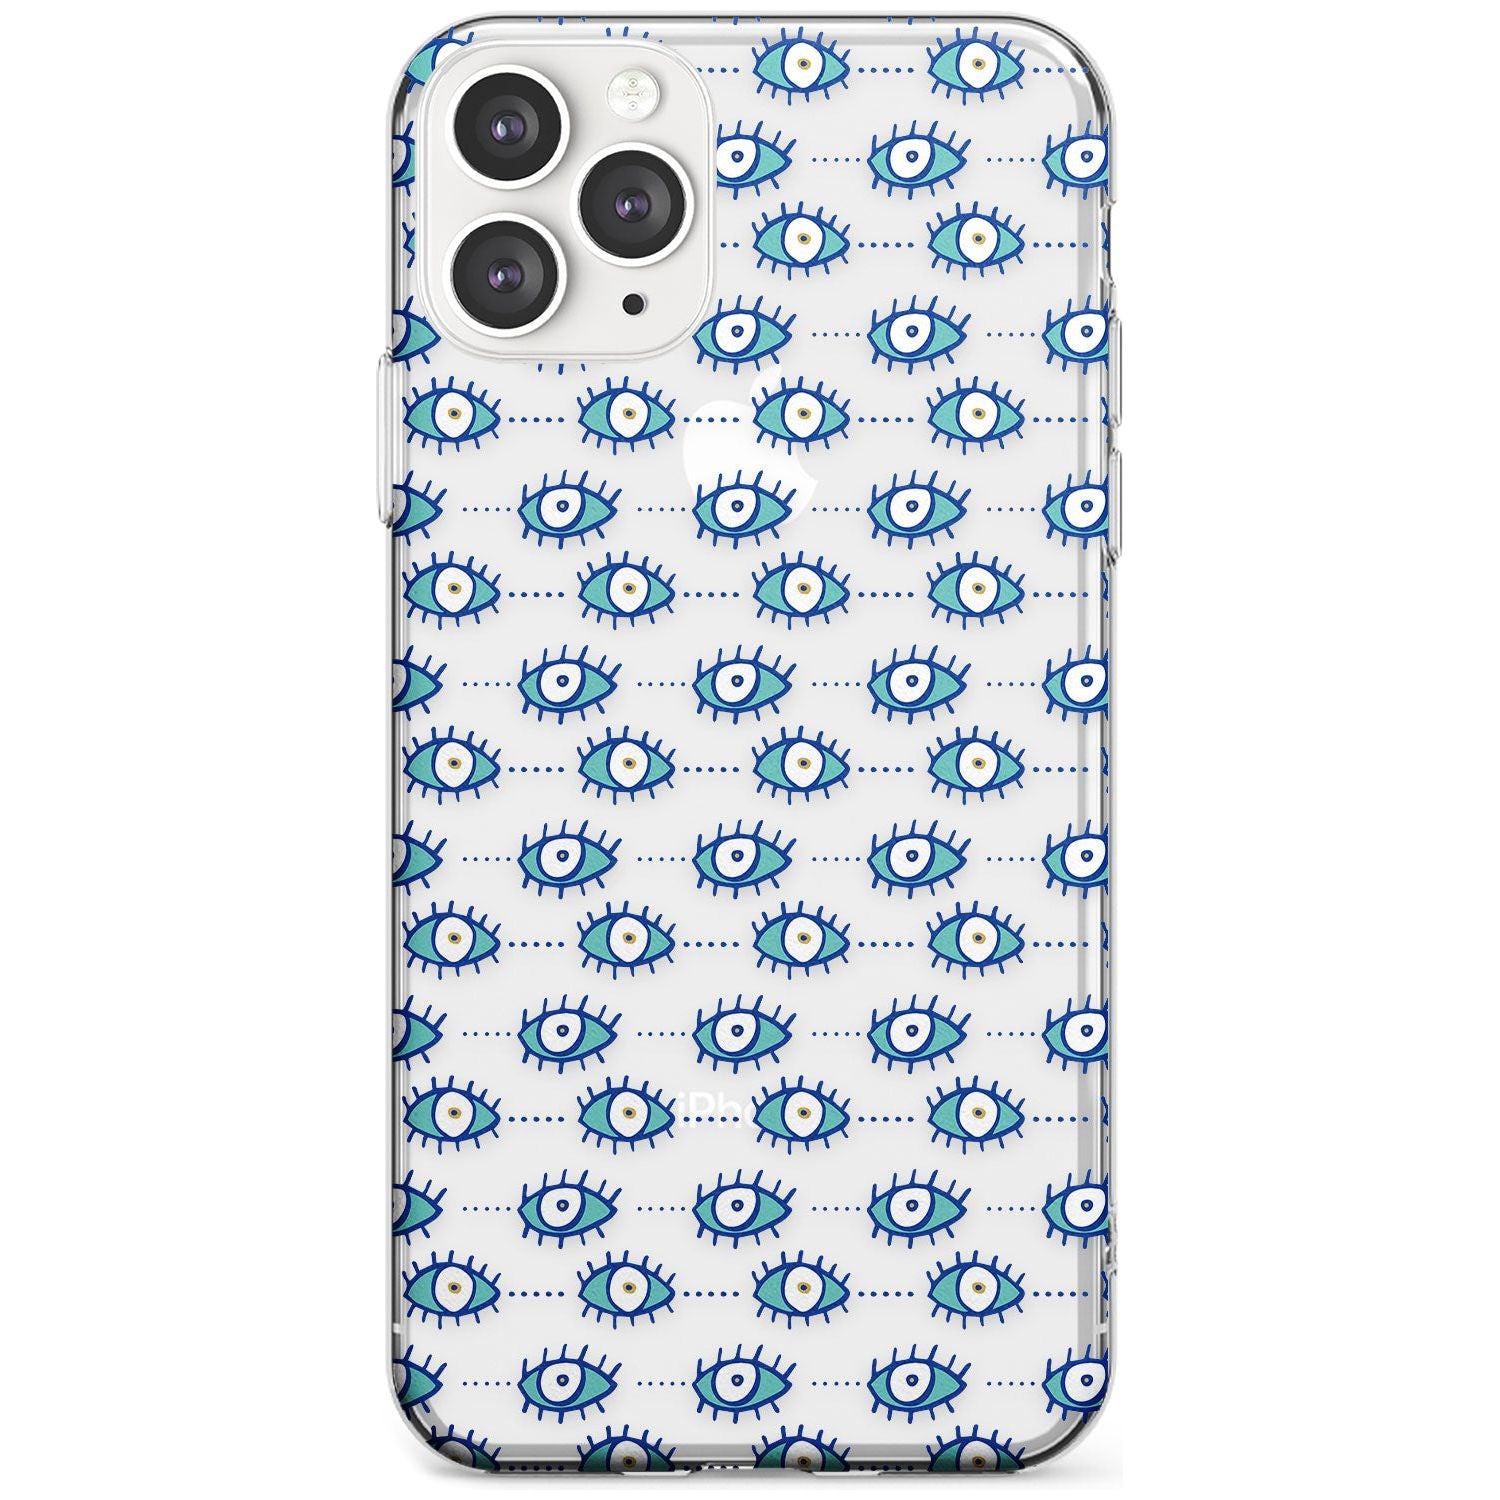 Crazy Eyes (Clear) Psychedelic Eyes Pattern Slim TPU Phone Case for iPhone 11 Pro Max